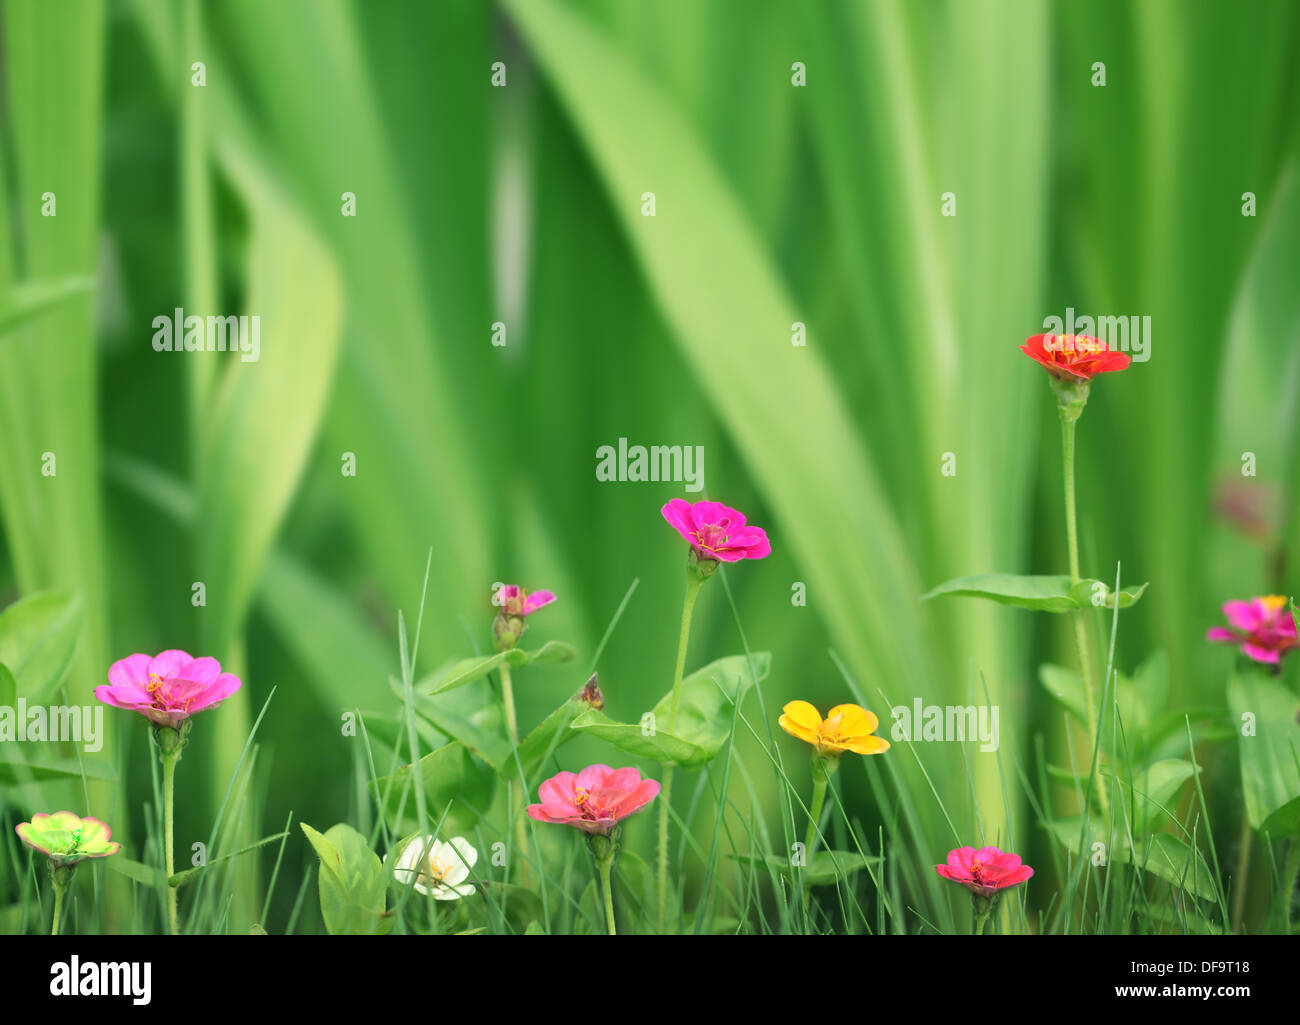 Small beautiful flowers in the garden over green grass background. Stock Photo